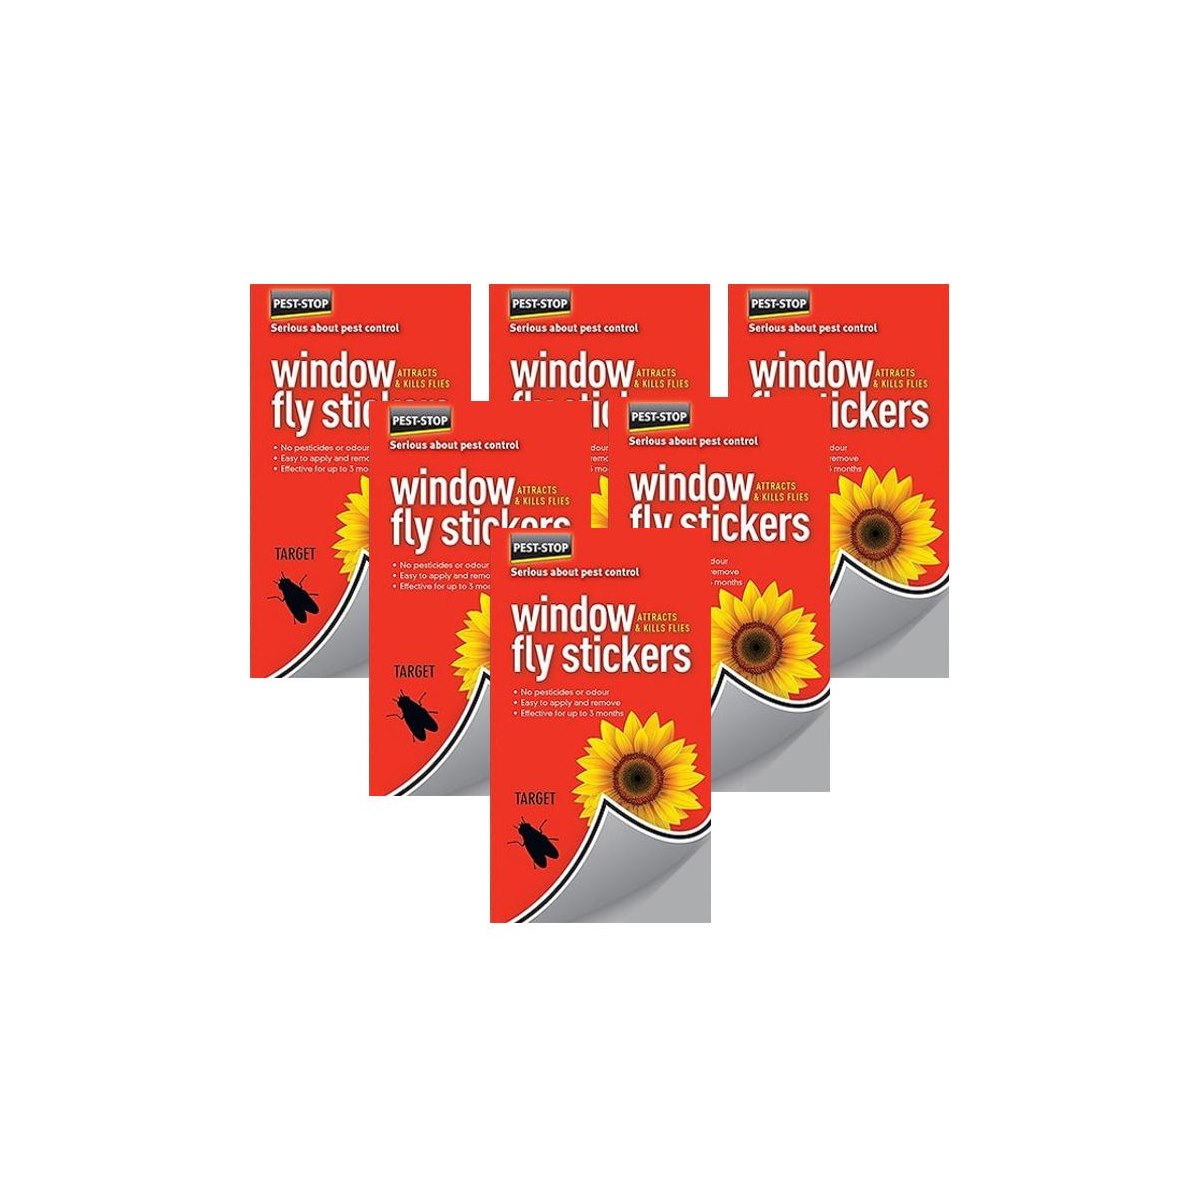 Case of 6 x Pest Stop Window Fly Stickers Pack of 4